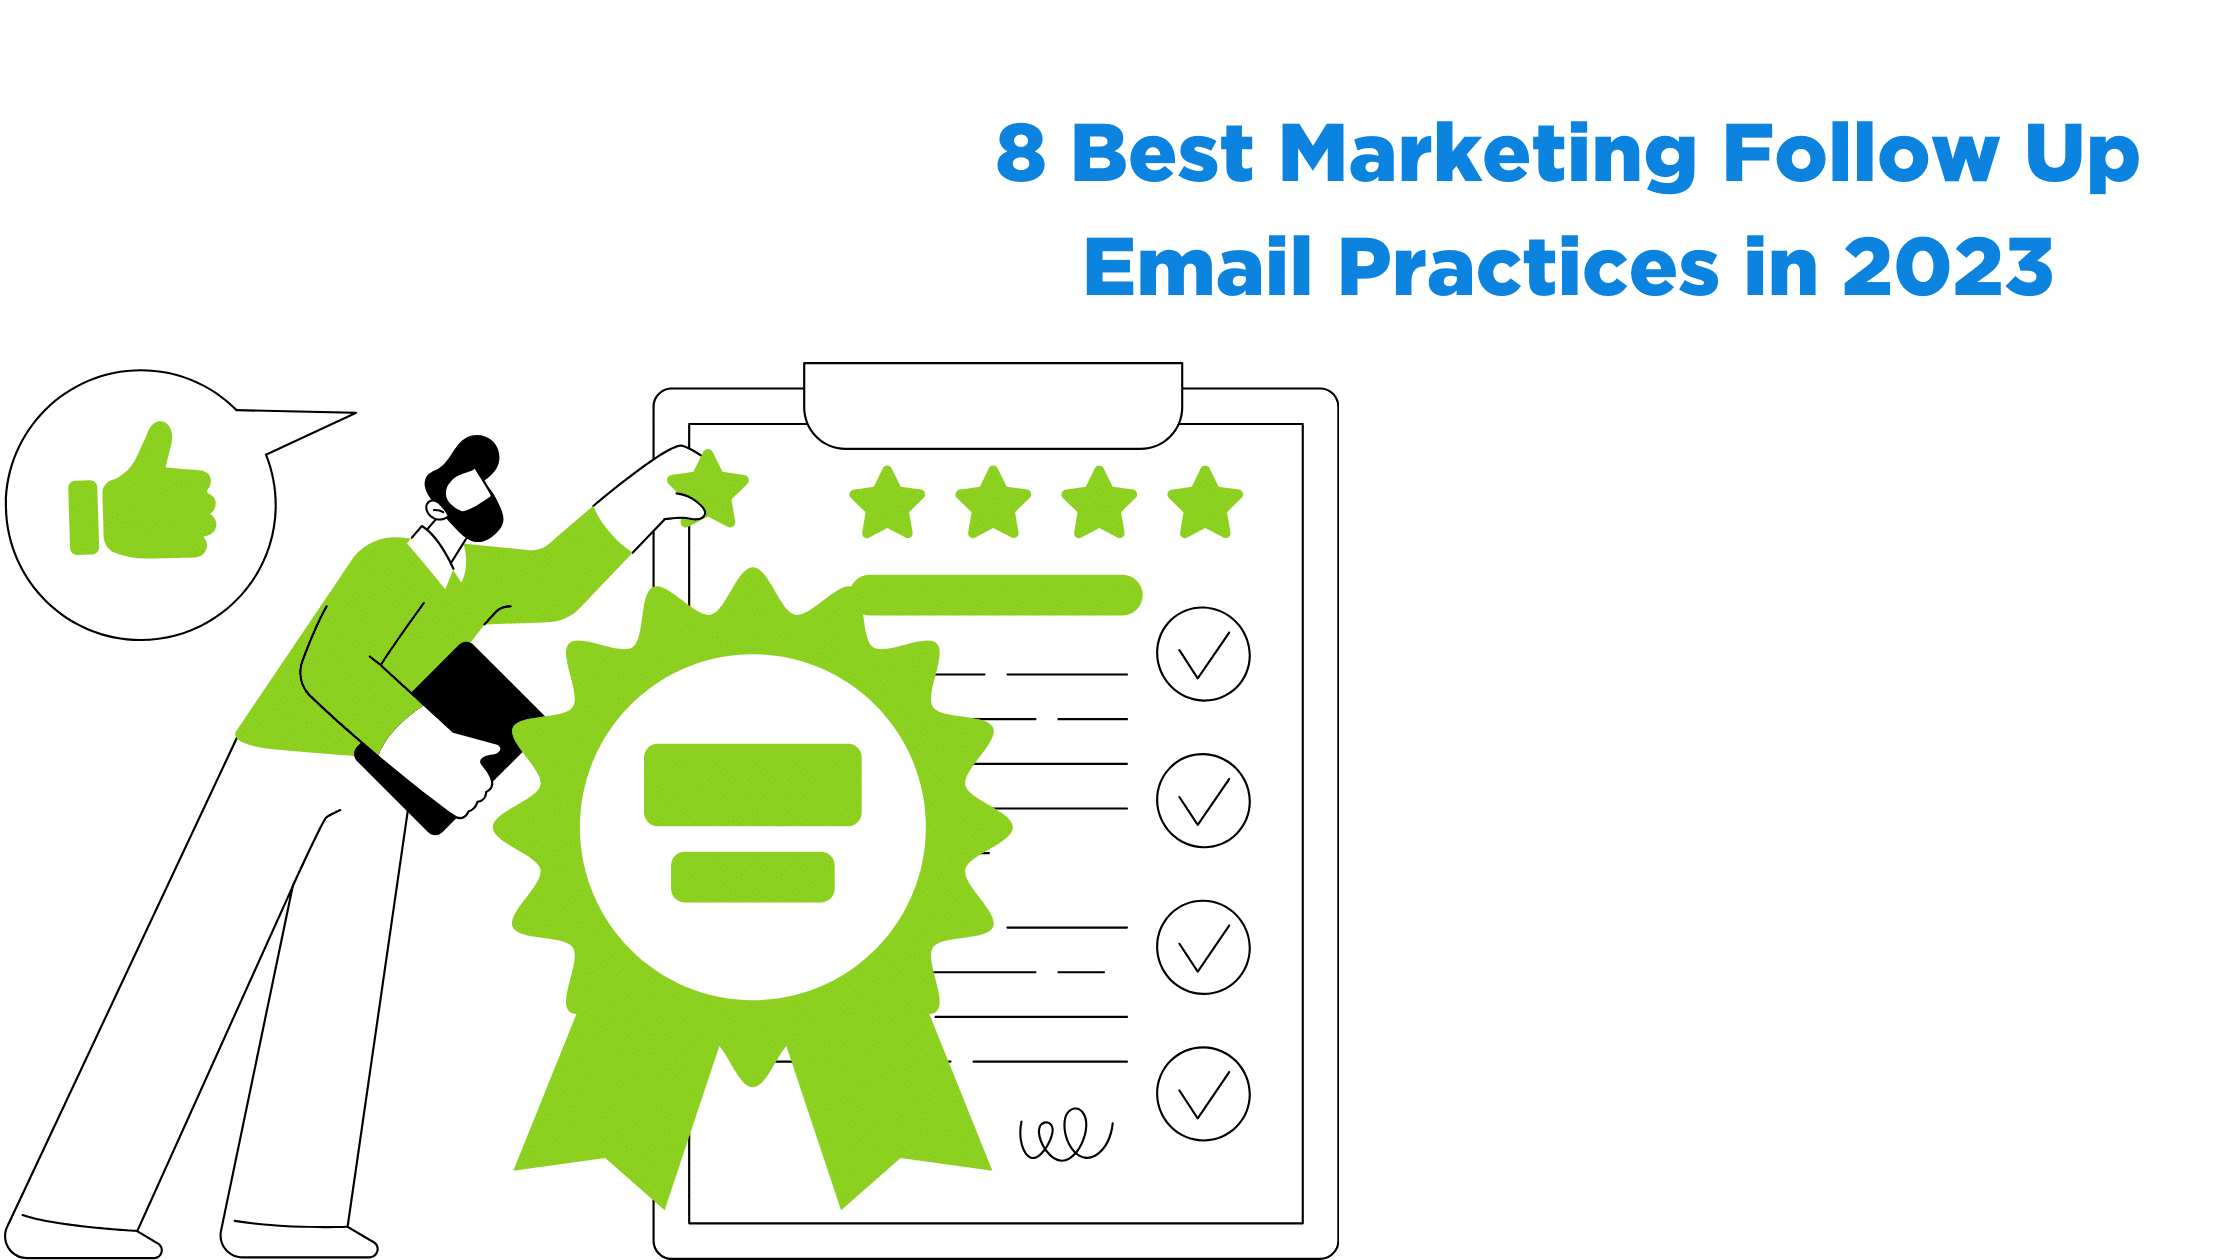 8 Best Marketing Follow Up Email Practices in 2023